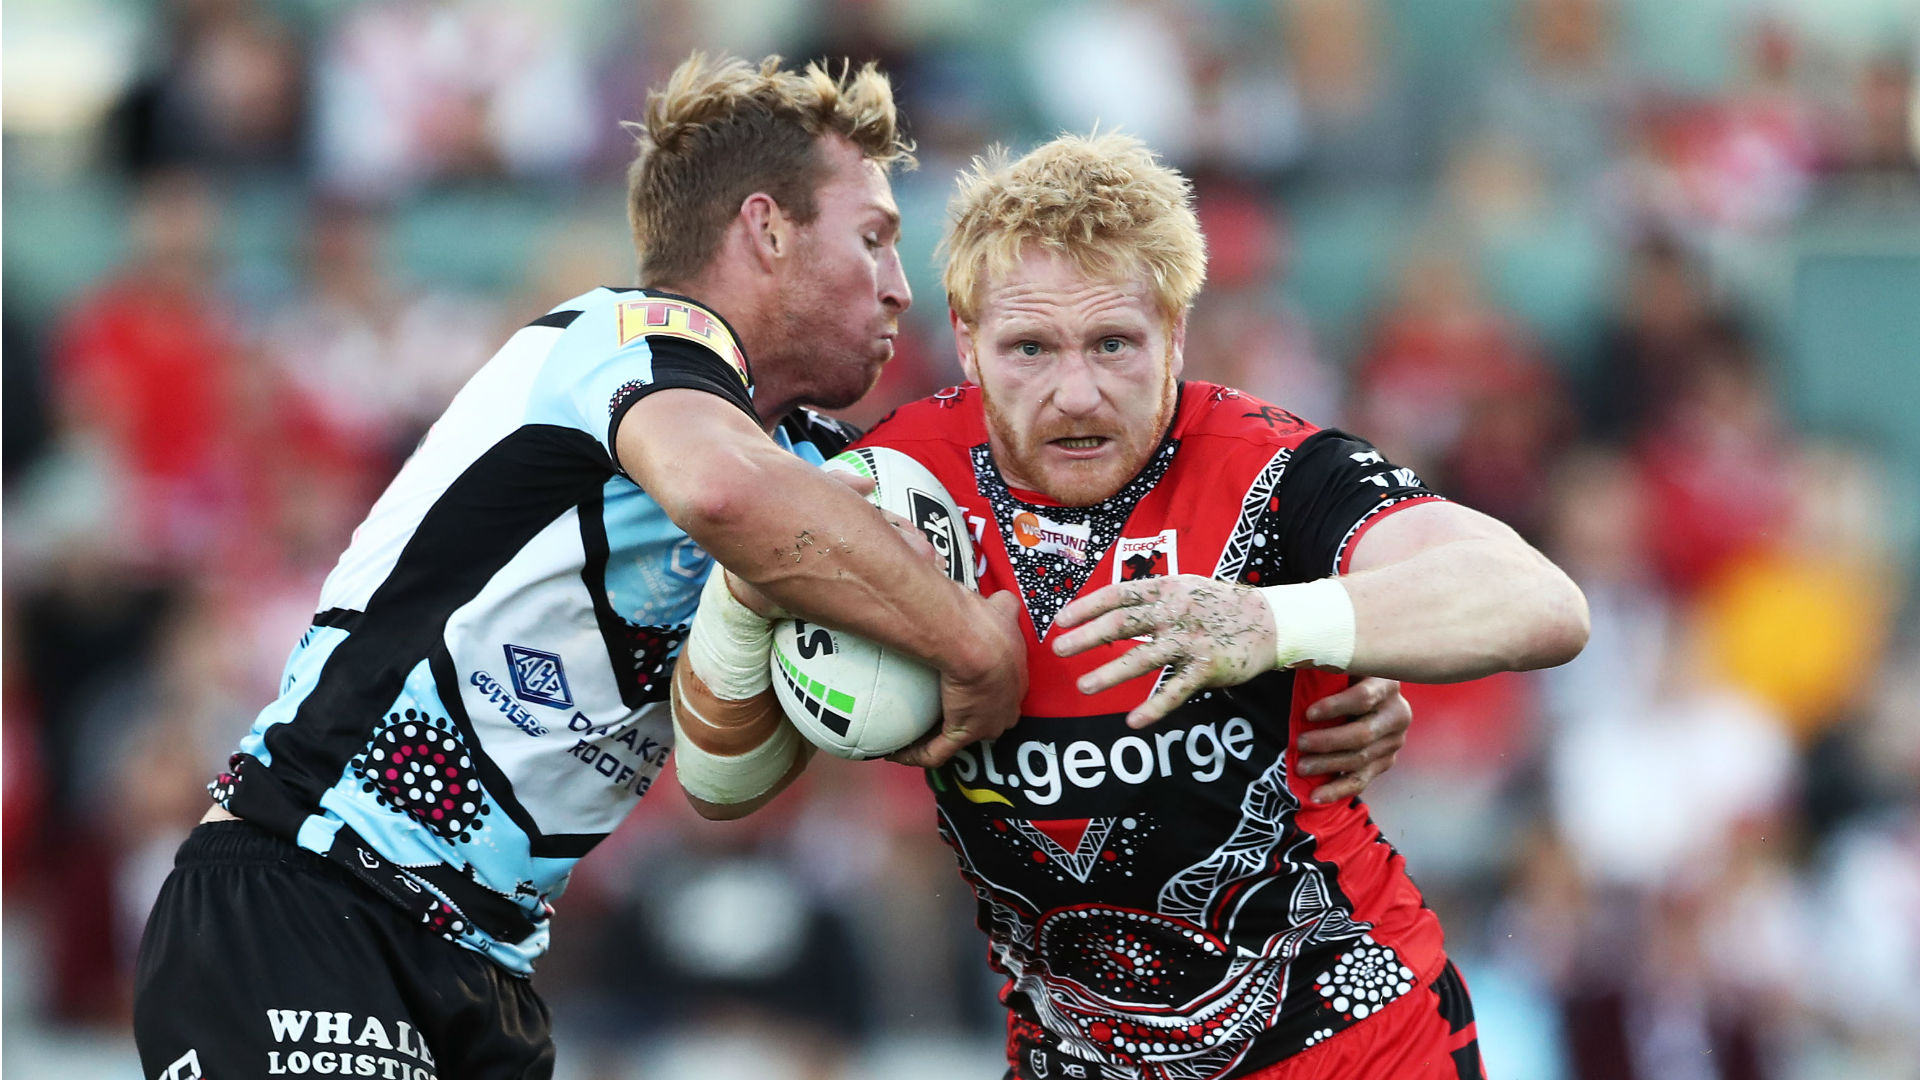 James Graham played on with a broken leg for St George Illawarra Dragons on Sunday, but will now miss around eight weeks of NRL action.